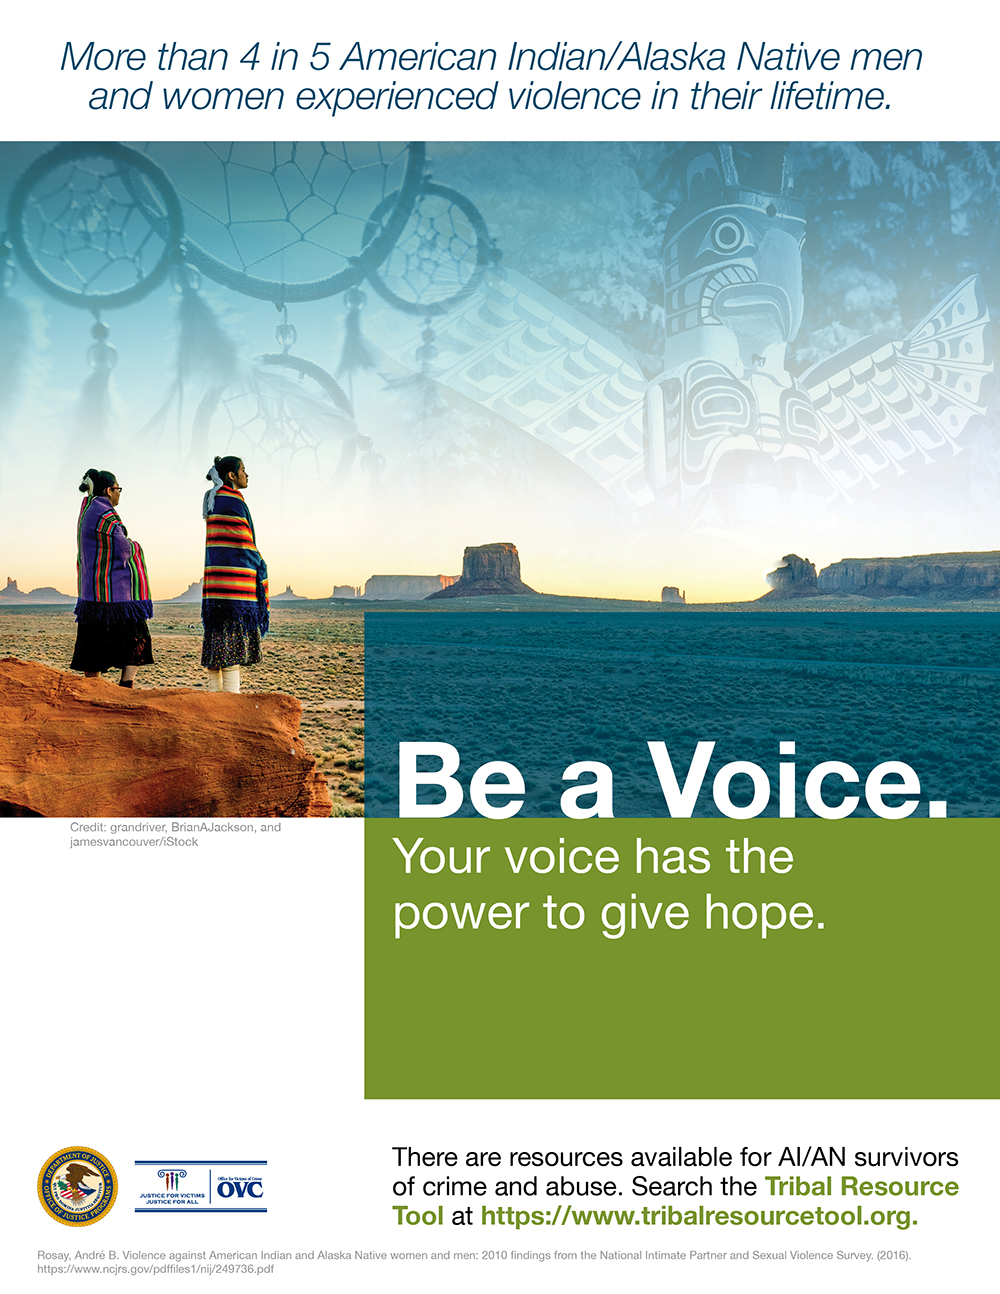 Be a Voice. Your voice has the power to give hope.